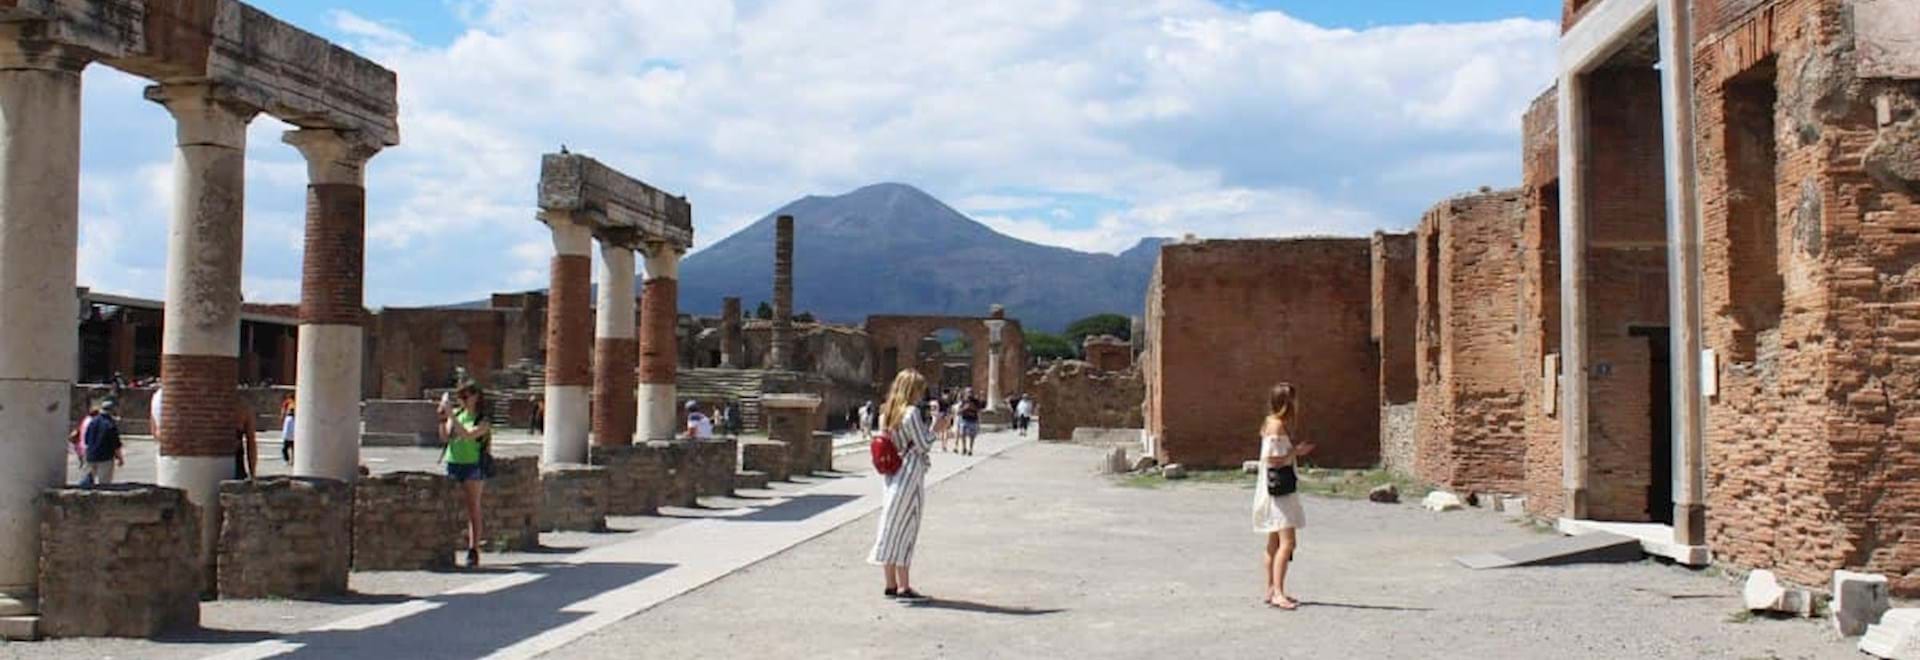 beautiful view of the ruins of Pompeii